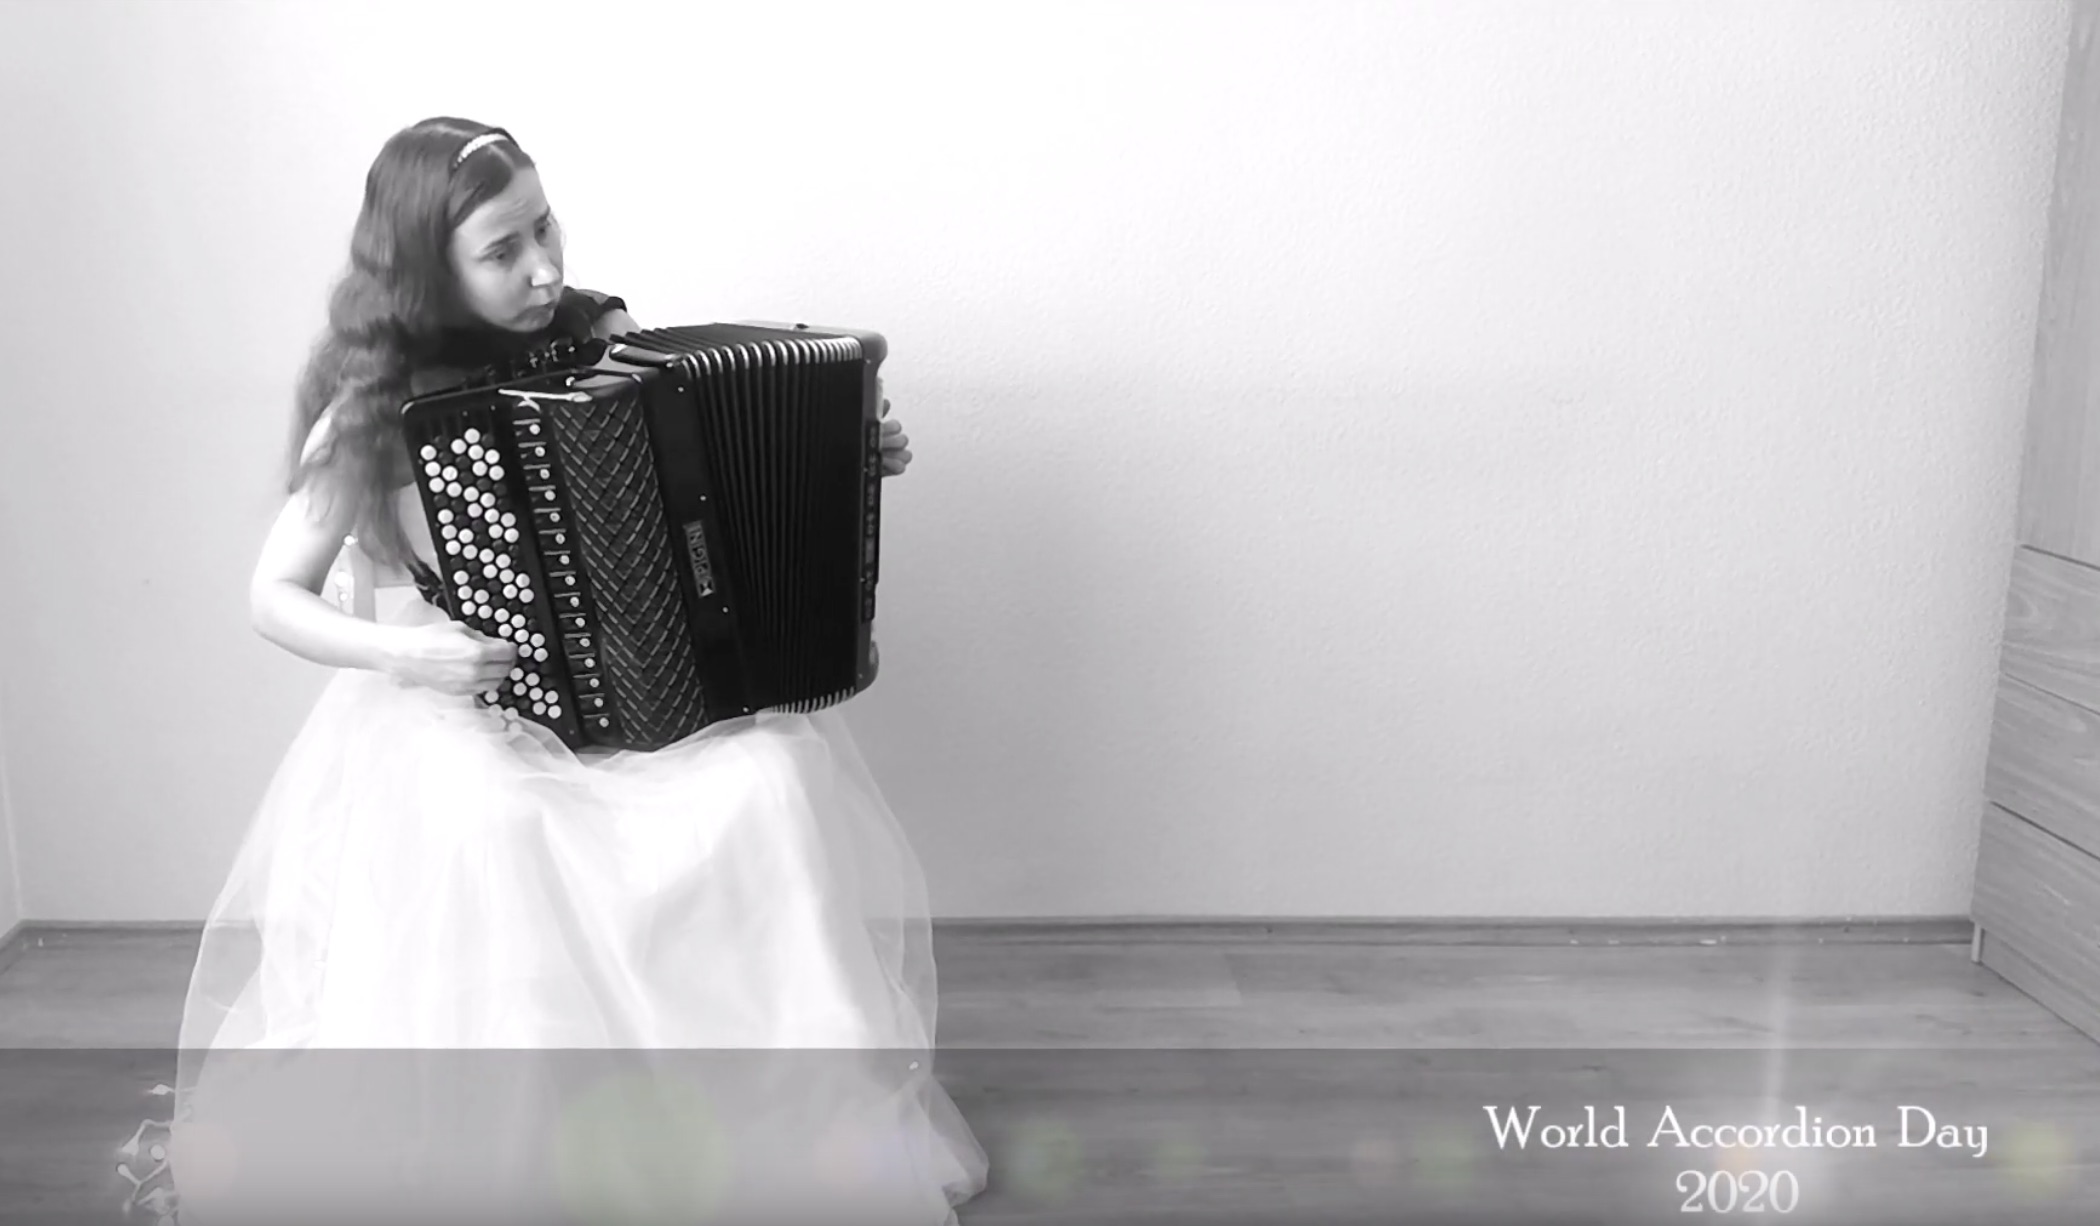 In Case You Missed World Accordion Day in 2020